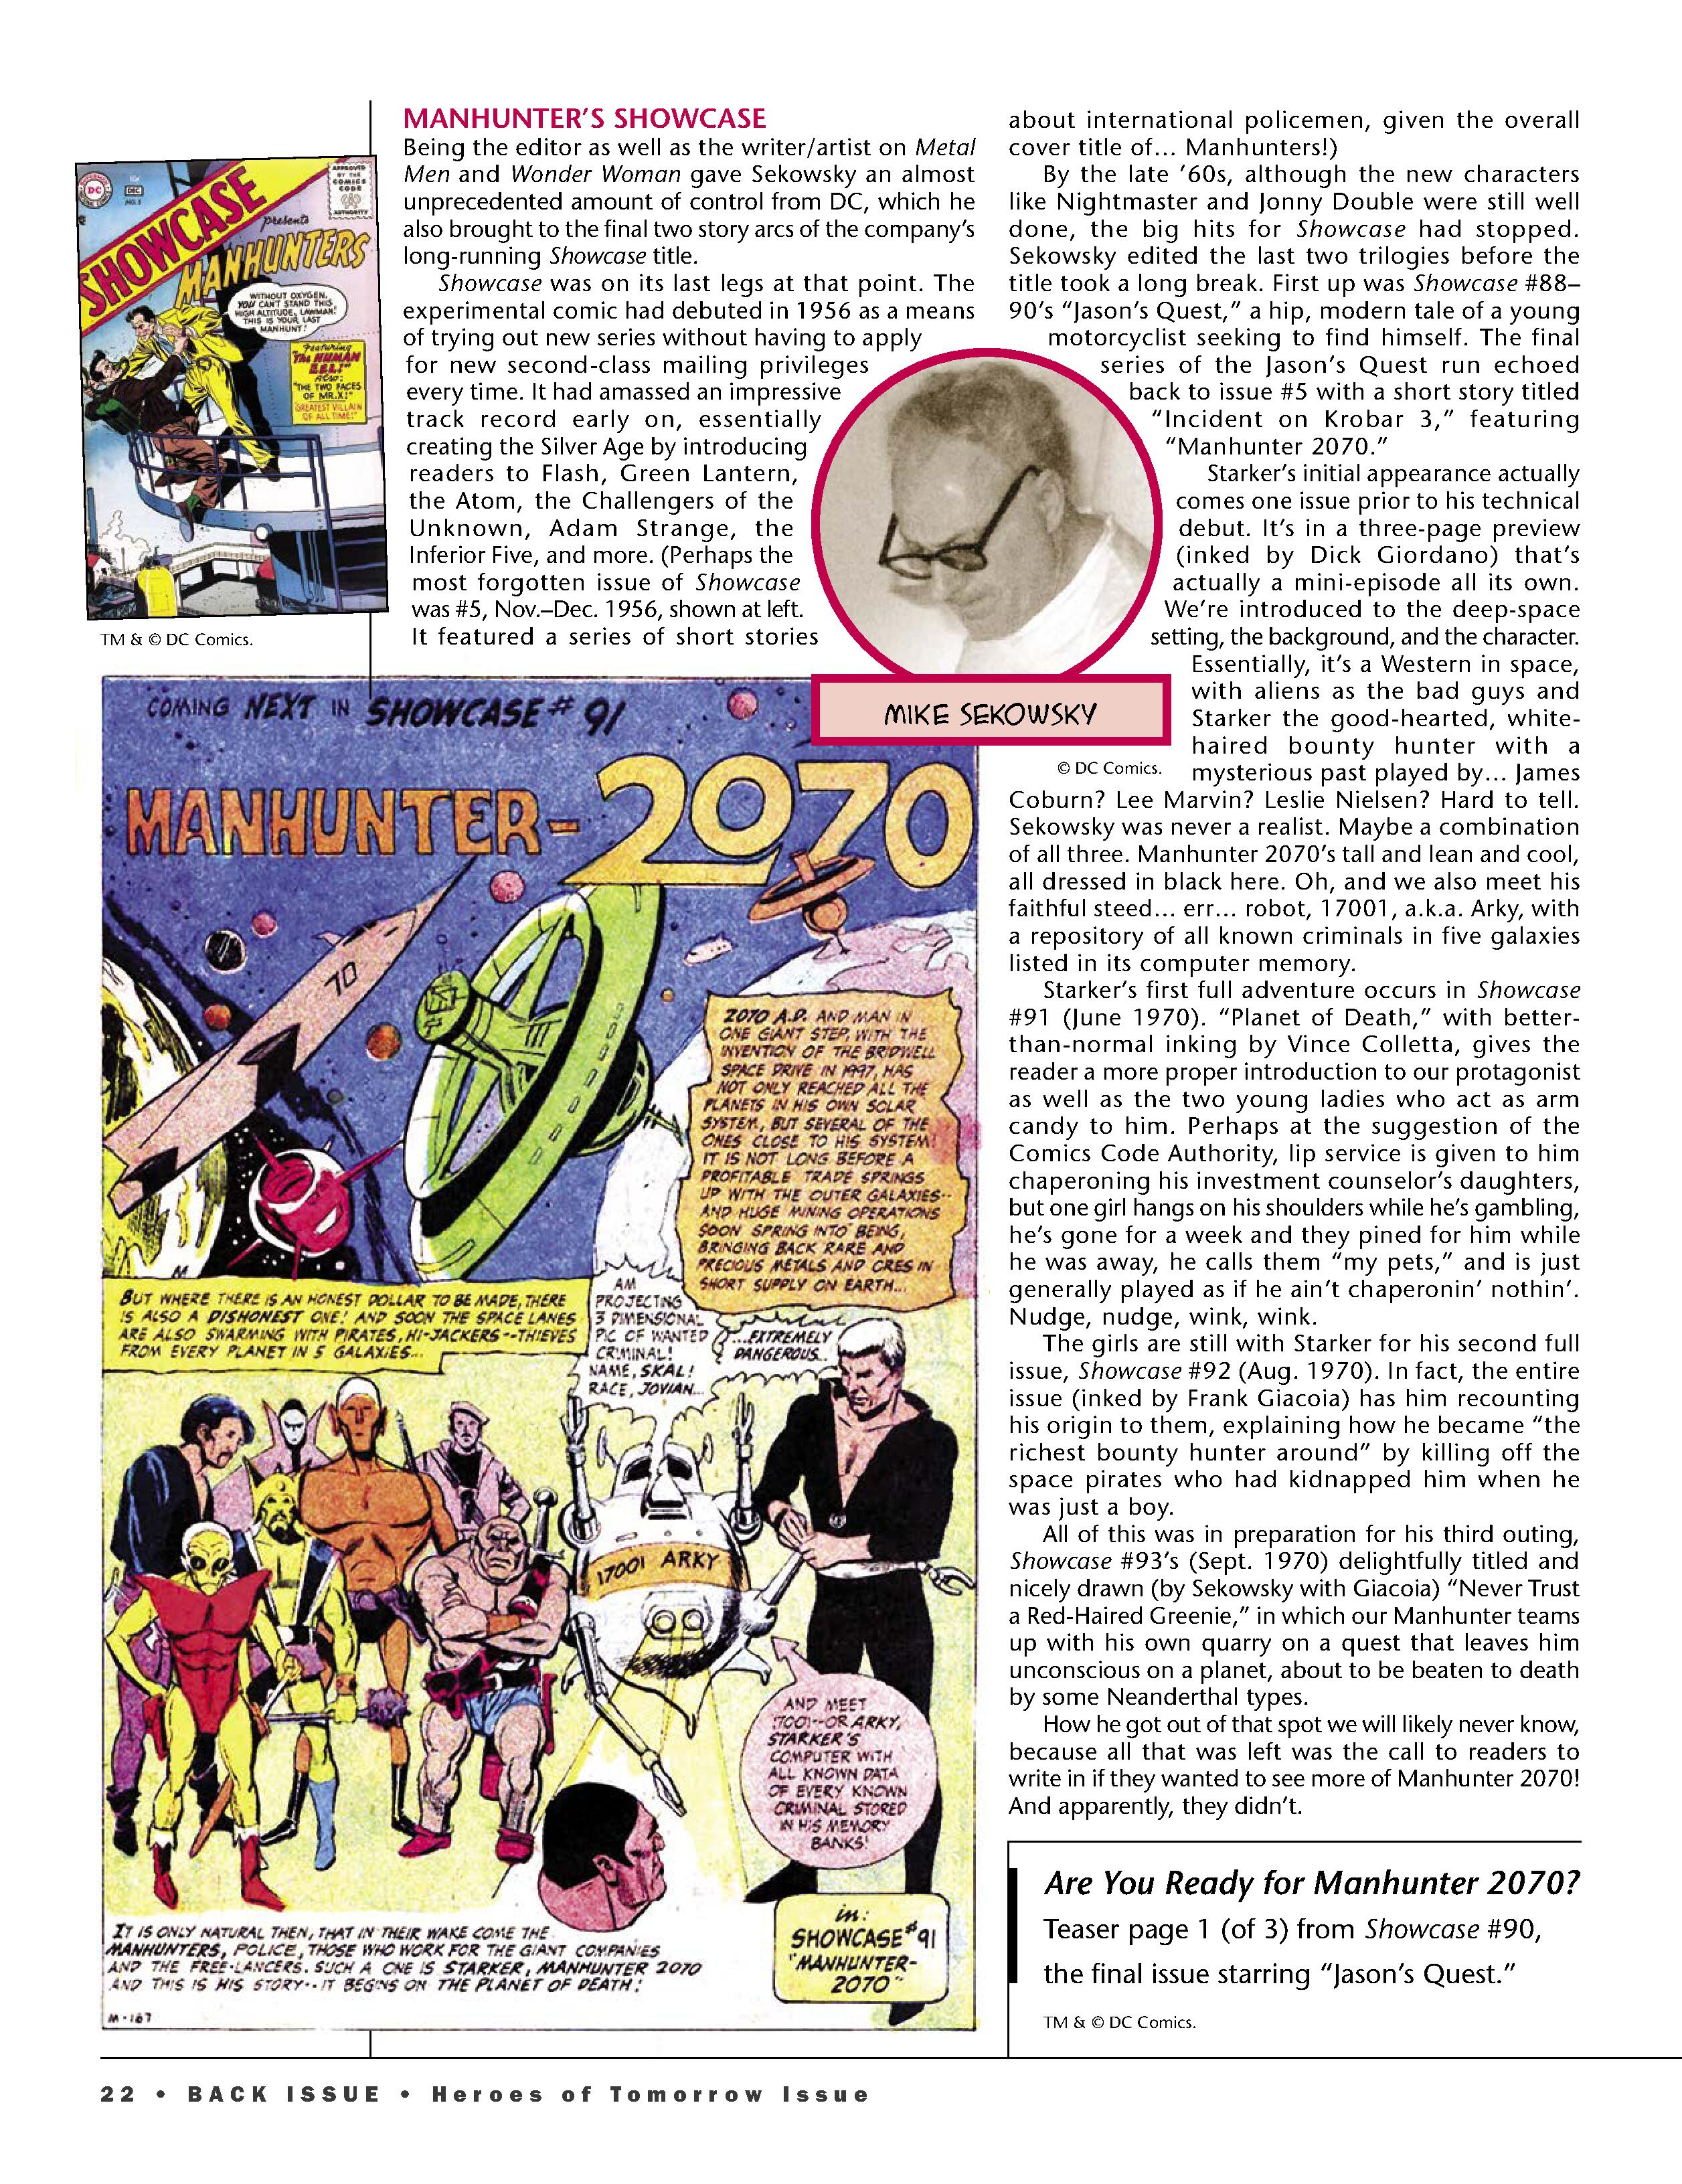 Read online Back Issue comic -  Issue #120 - 24